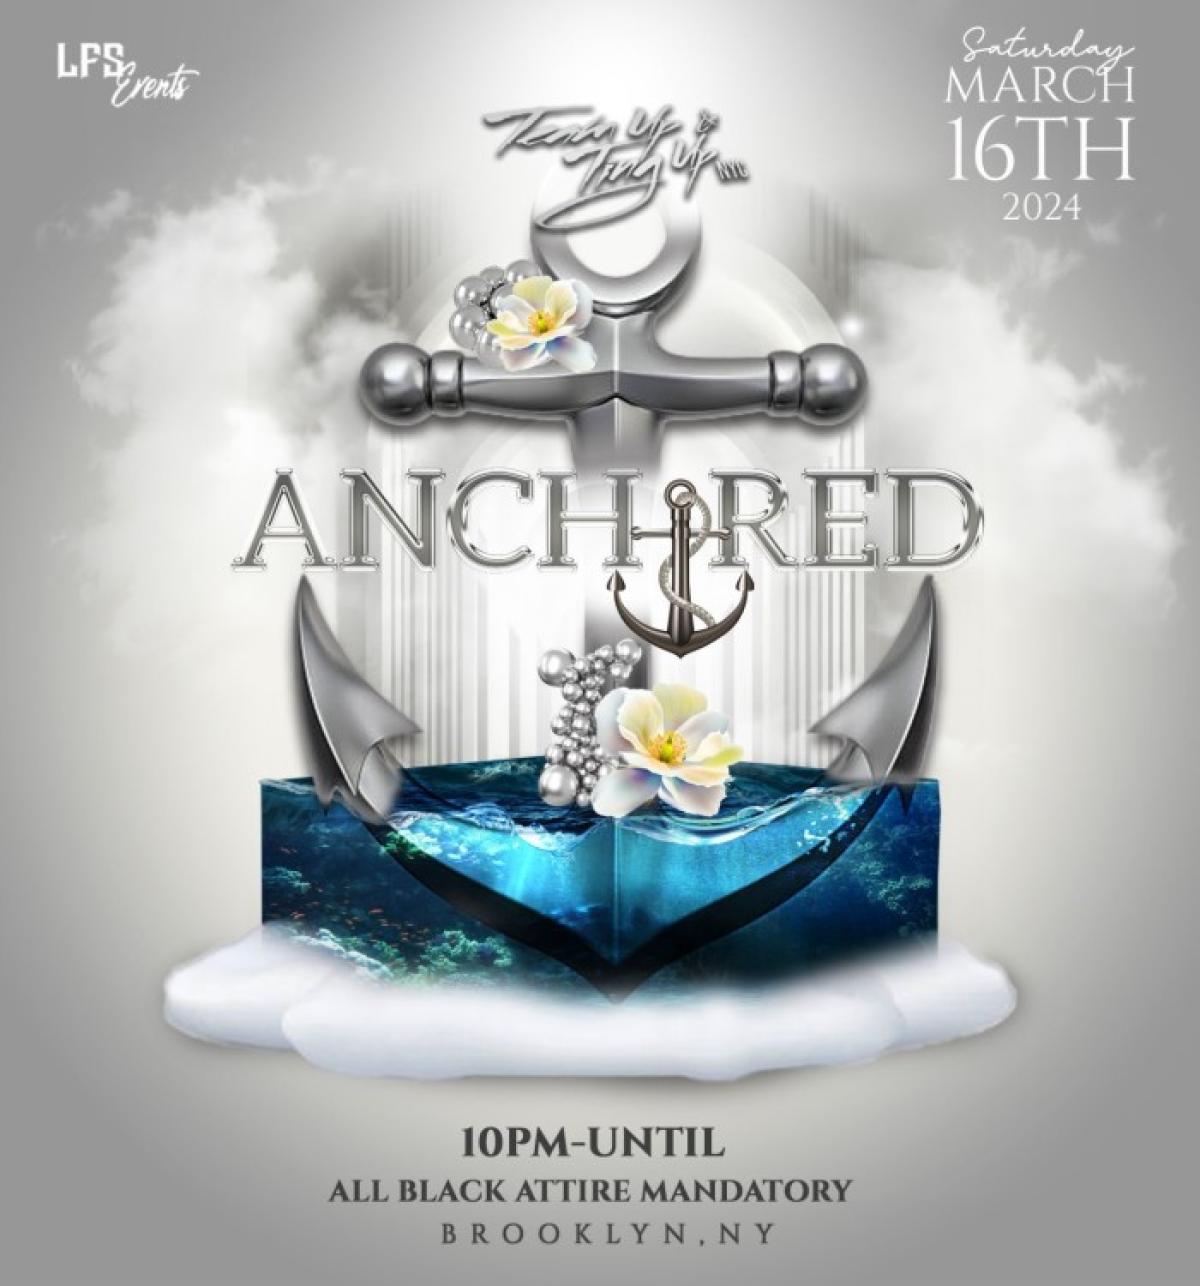 Anchored - Team Up & Ting Up  flyer or graphic.